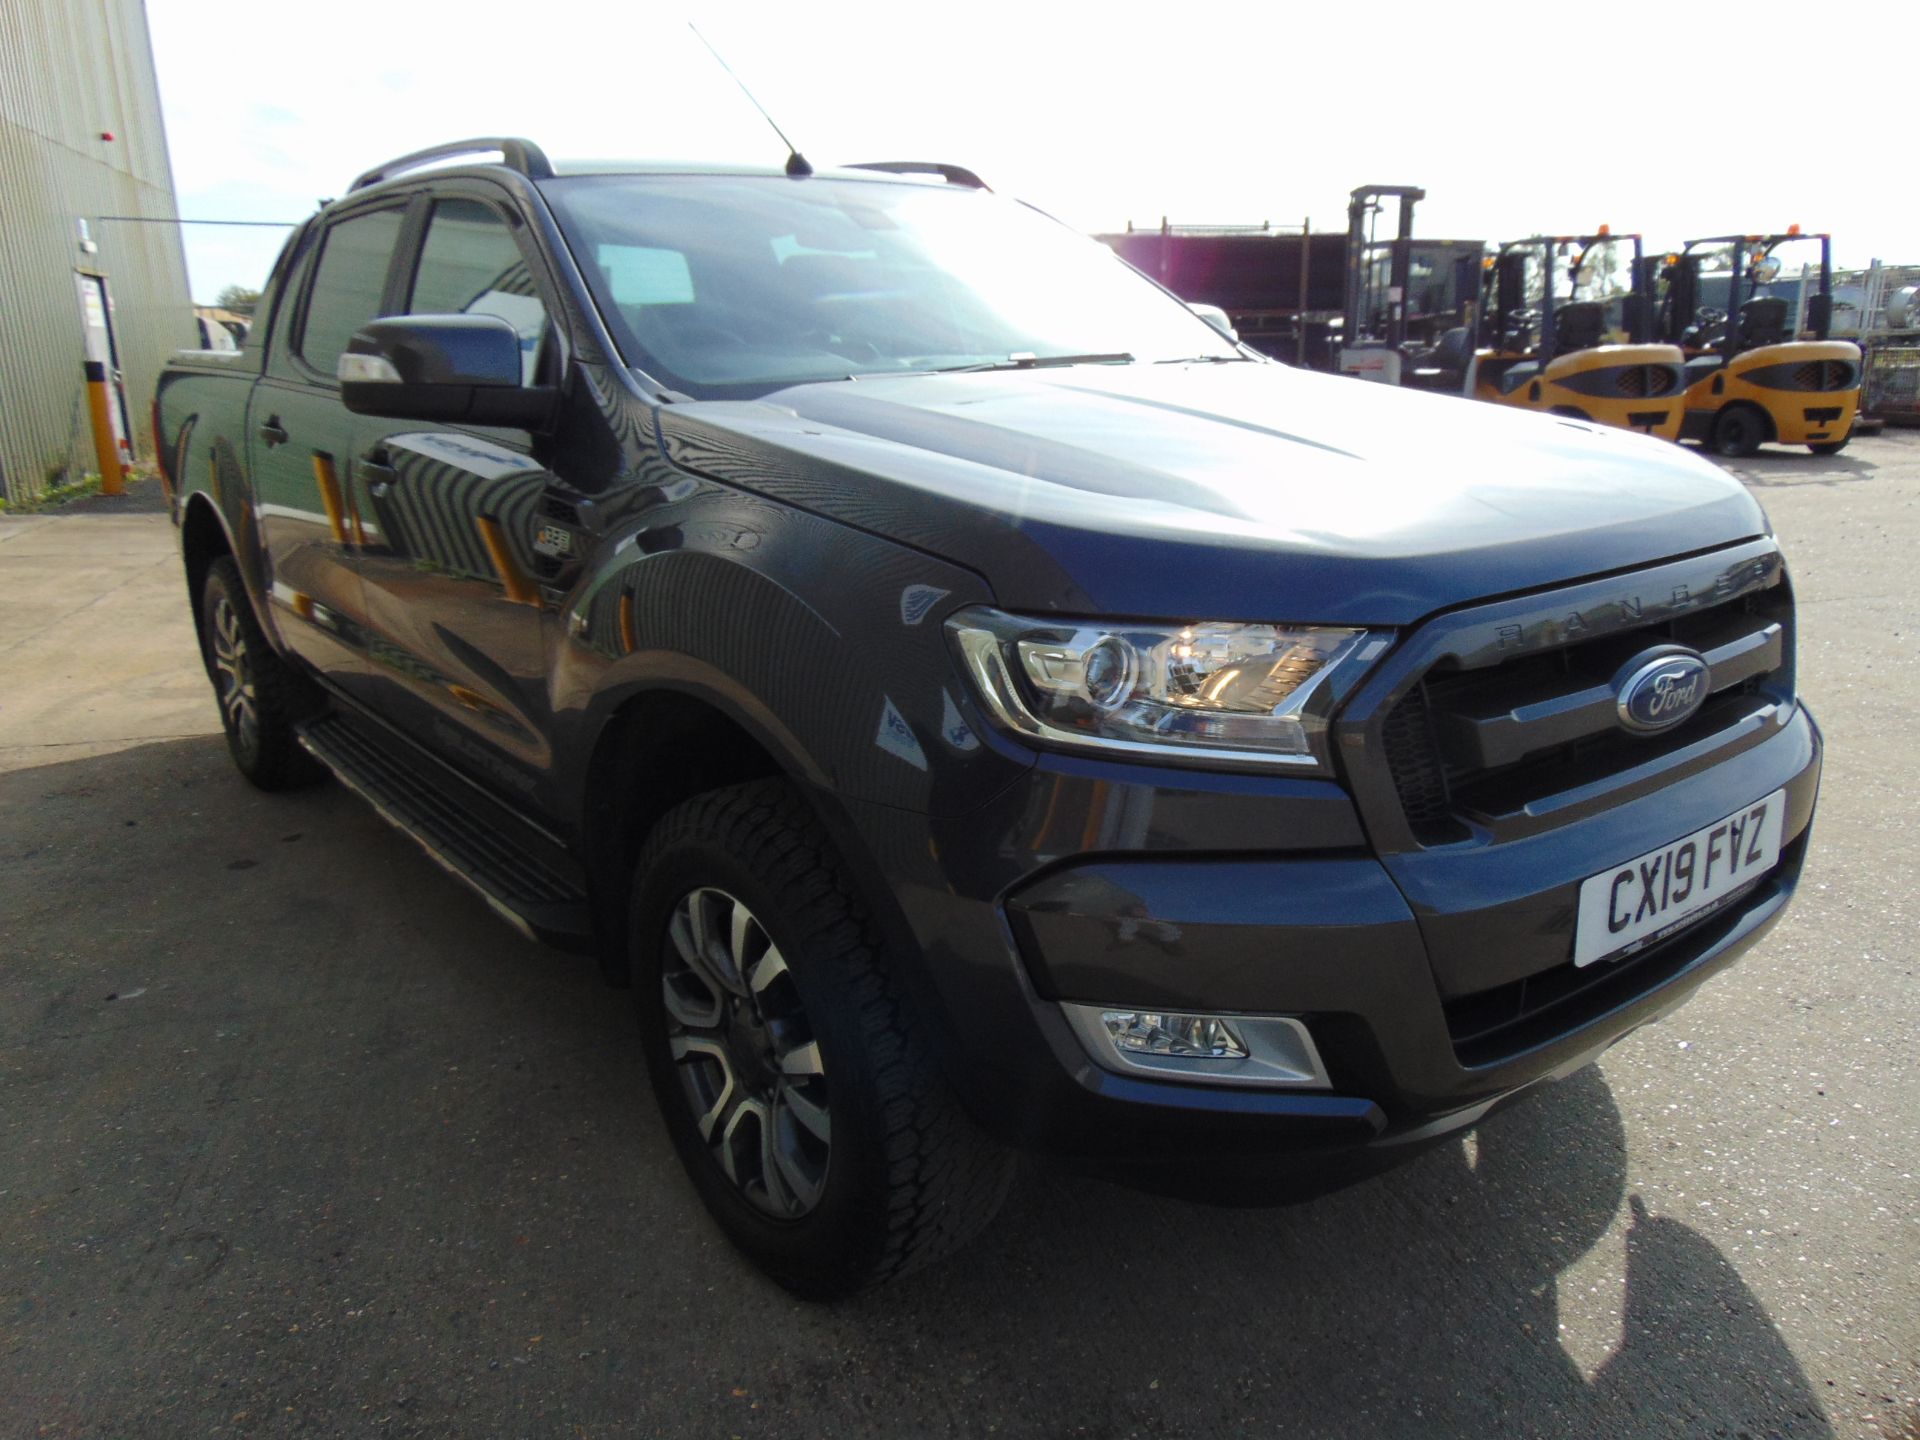 2019 Ford Ranger Wildtrak Double Cab 4x4 3.2 6 Speed Auto ONLY 45,667 Miles Warranted - Image 4 of 45